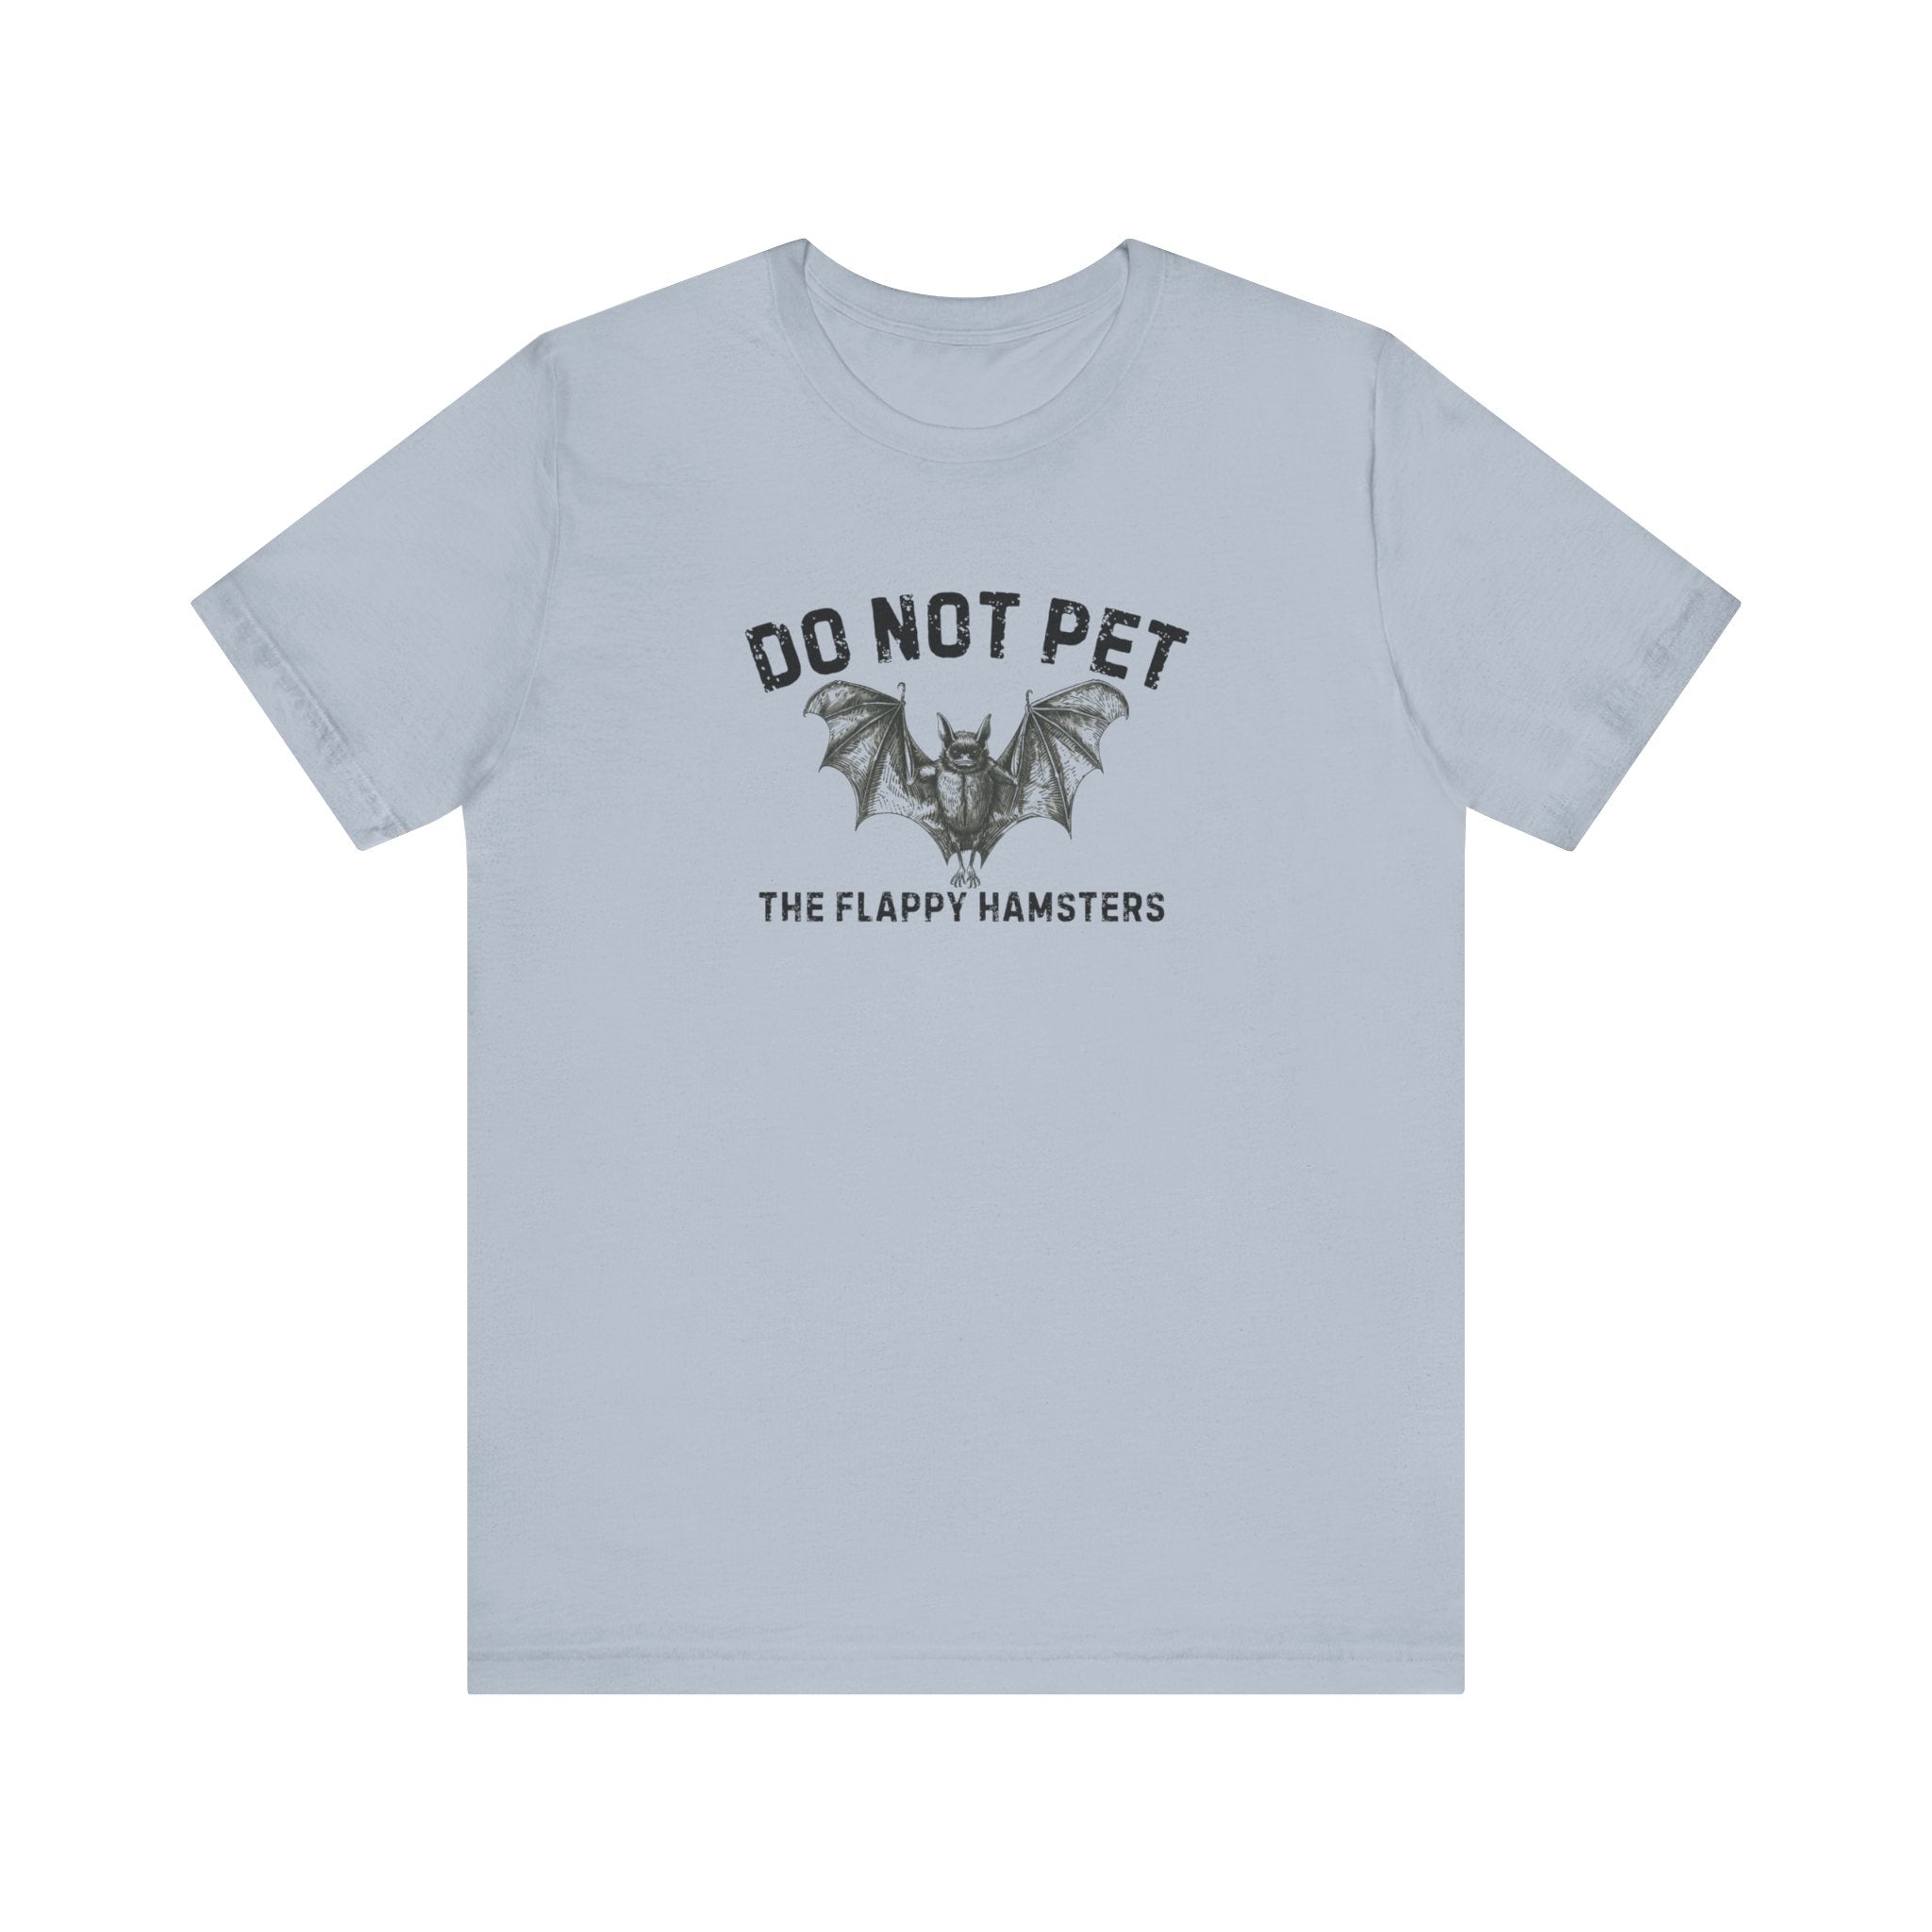 Do Not Pet The Flappy Hamsters Shirt Funny Bat Lover Tee